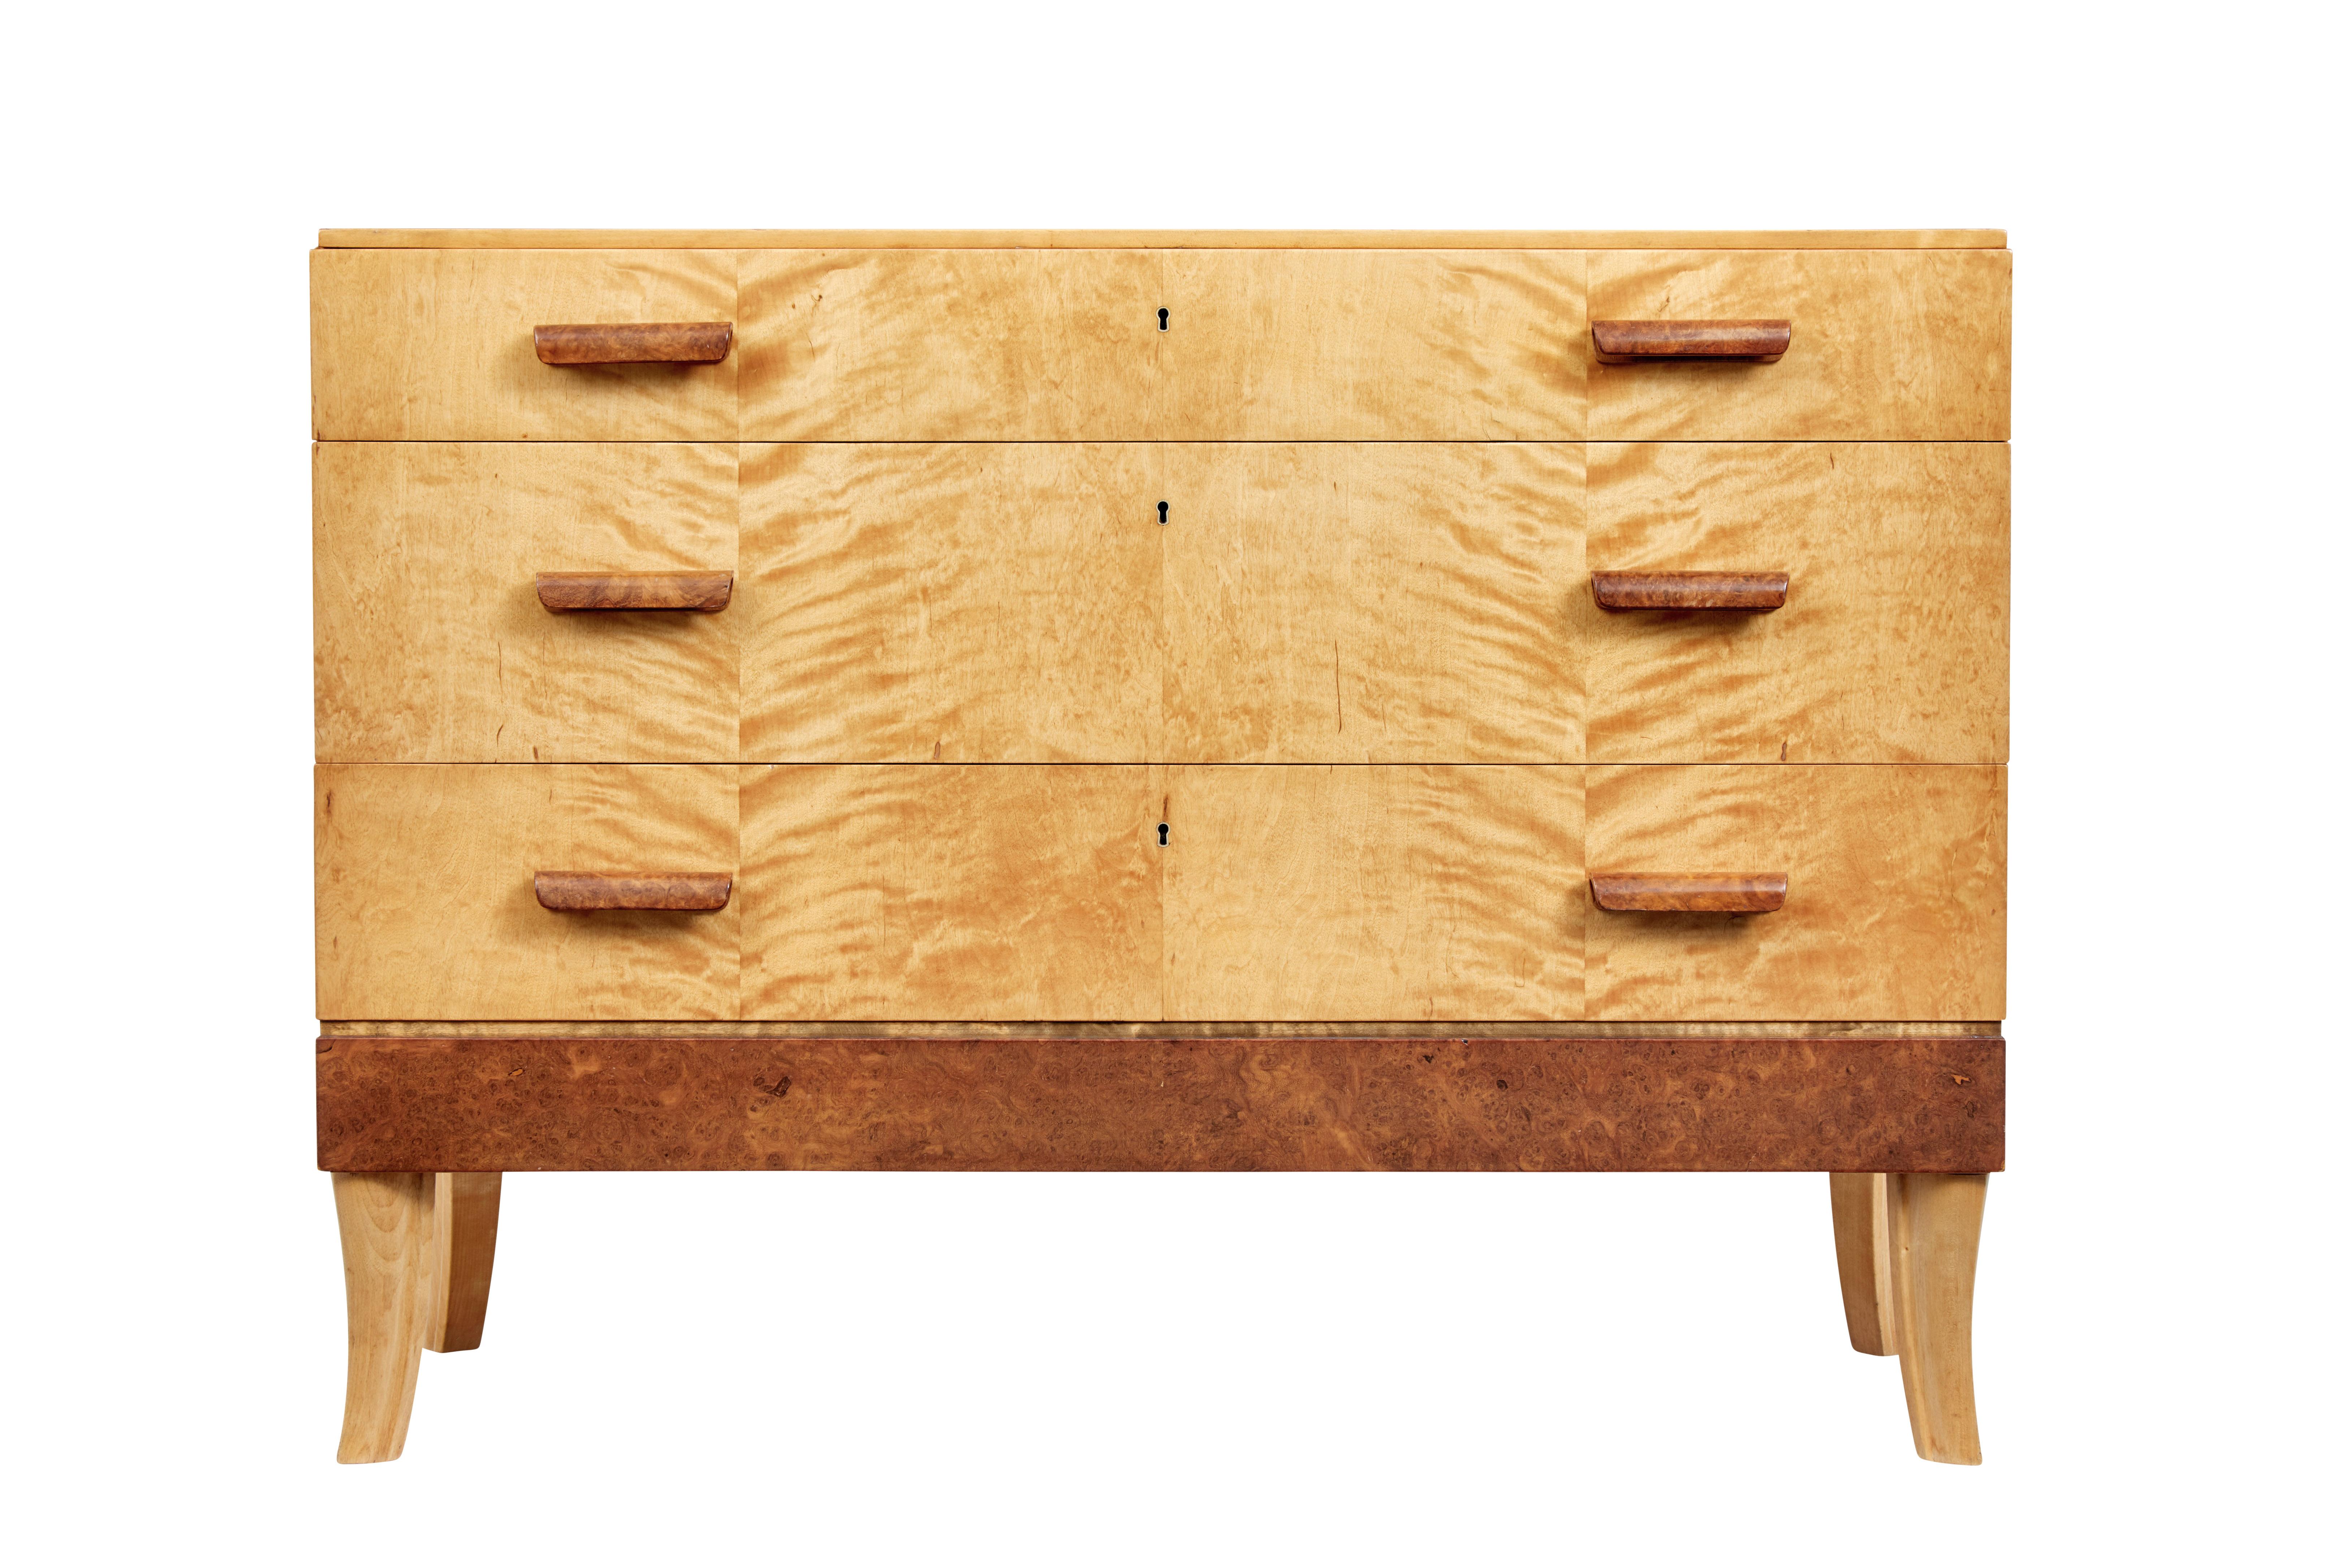 Mid-20th Century burr birch Scandinavian chest of drawers circa 1950.

3 drawers fitted with burr shaped handles, top drawer fitted with partitions and fitted turned bowl for jewellery etc.

Handles and bottom burr panel add contrast to the